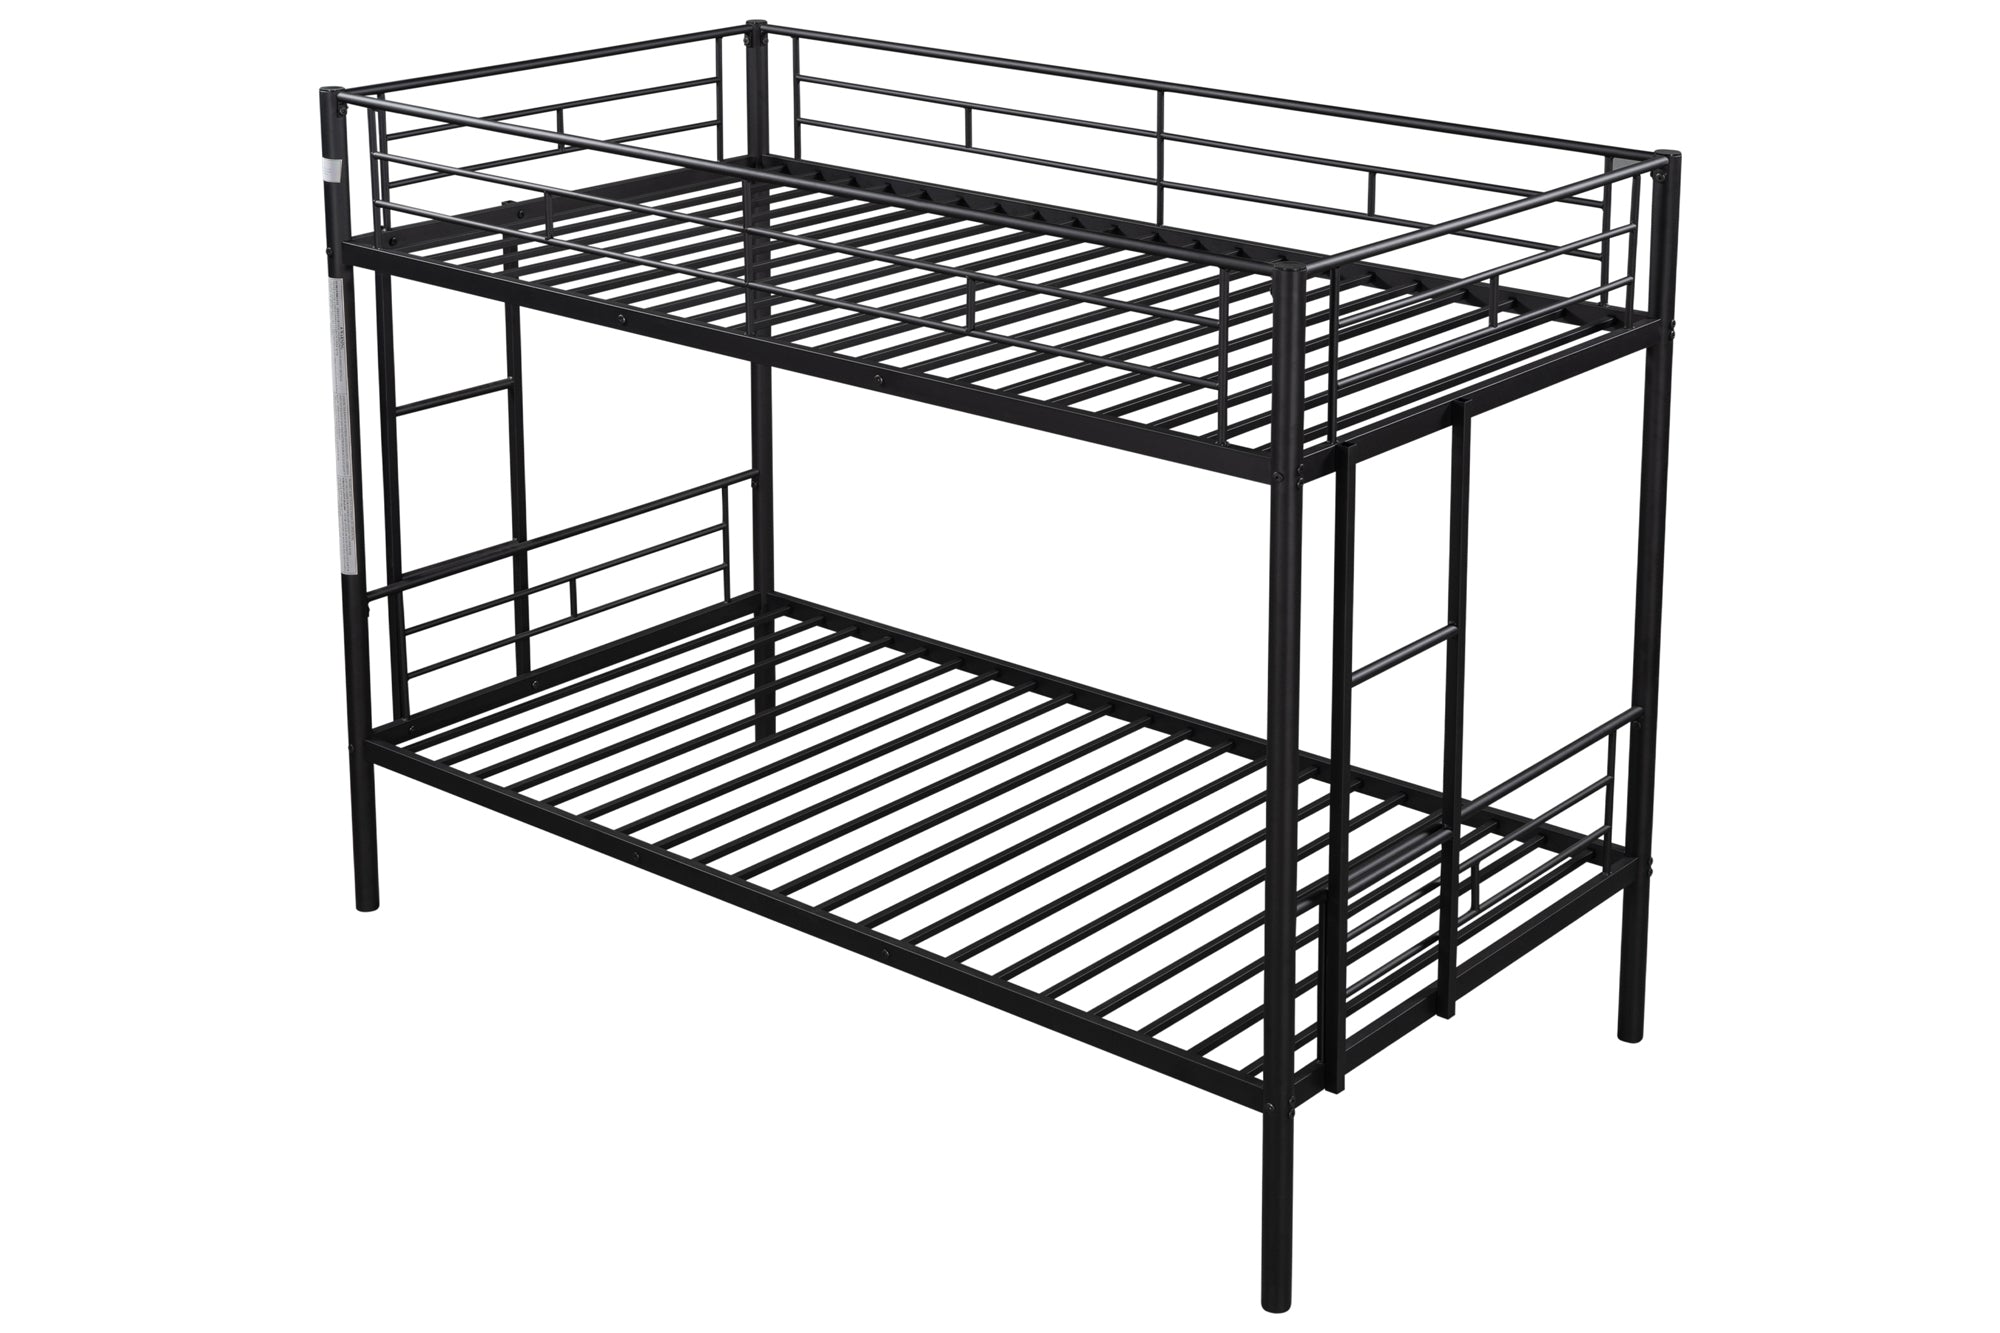 Bunk Bed with Ladder, SESSLIFE Metal Bunk Beds with Guardrail for Boys Girls Toddlers, Black Twin Over Twin Bunk Bed, Kids Bunk Bed for Home Children’s Room, TE838